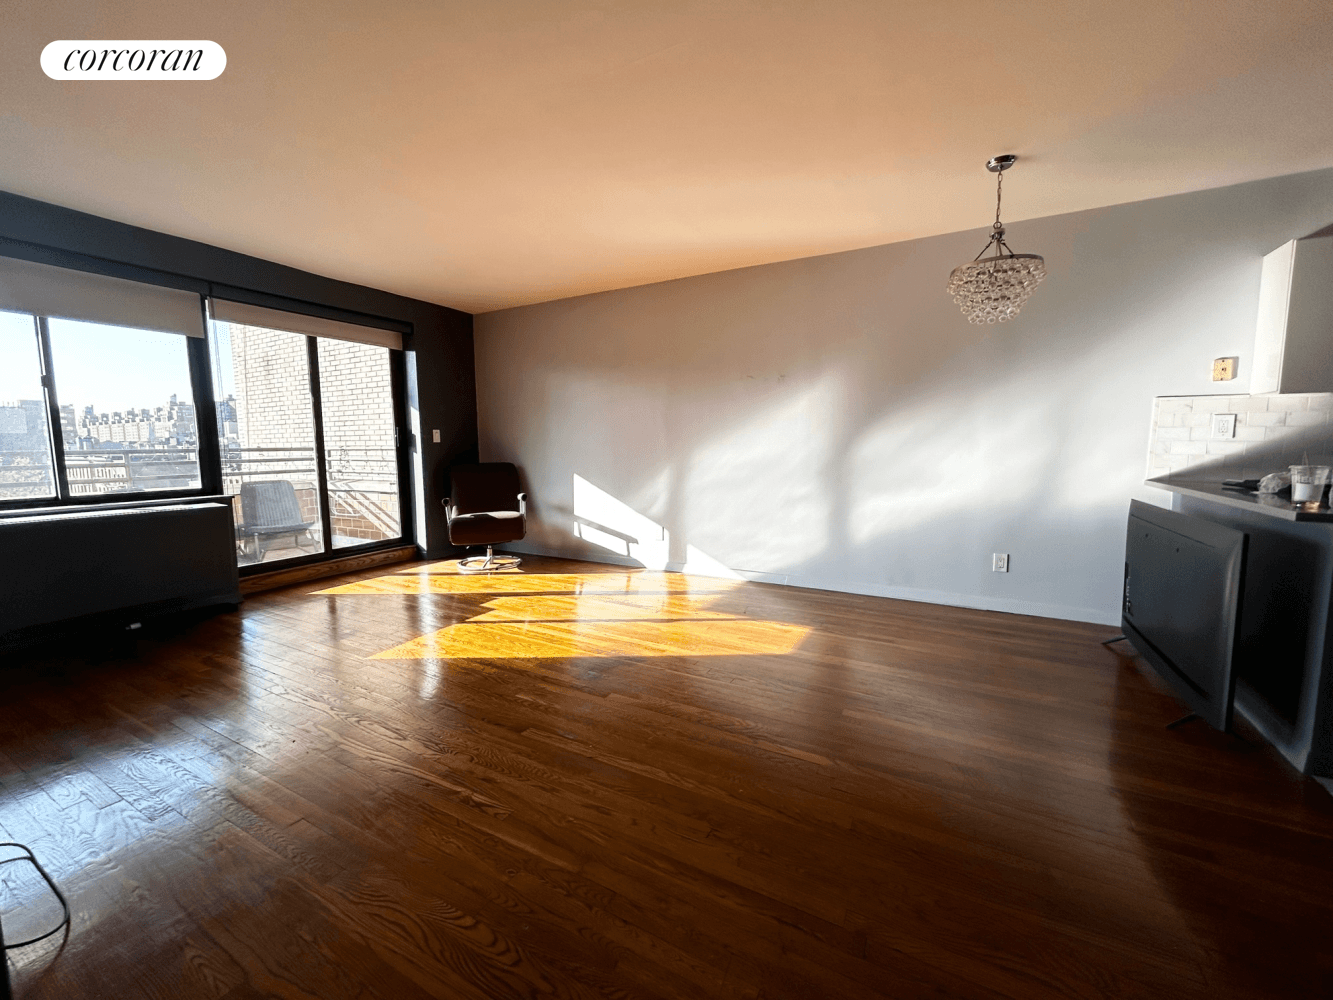 Fantastic Chelsea 1 Bedroom with Private Outdoor Space in a Boutique Condo BuildingApartment Features Large and versatile living space with enough room for a couch, TV, coffee table, dining table, ...